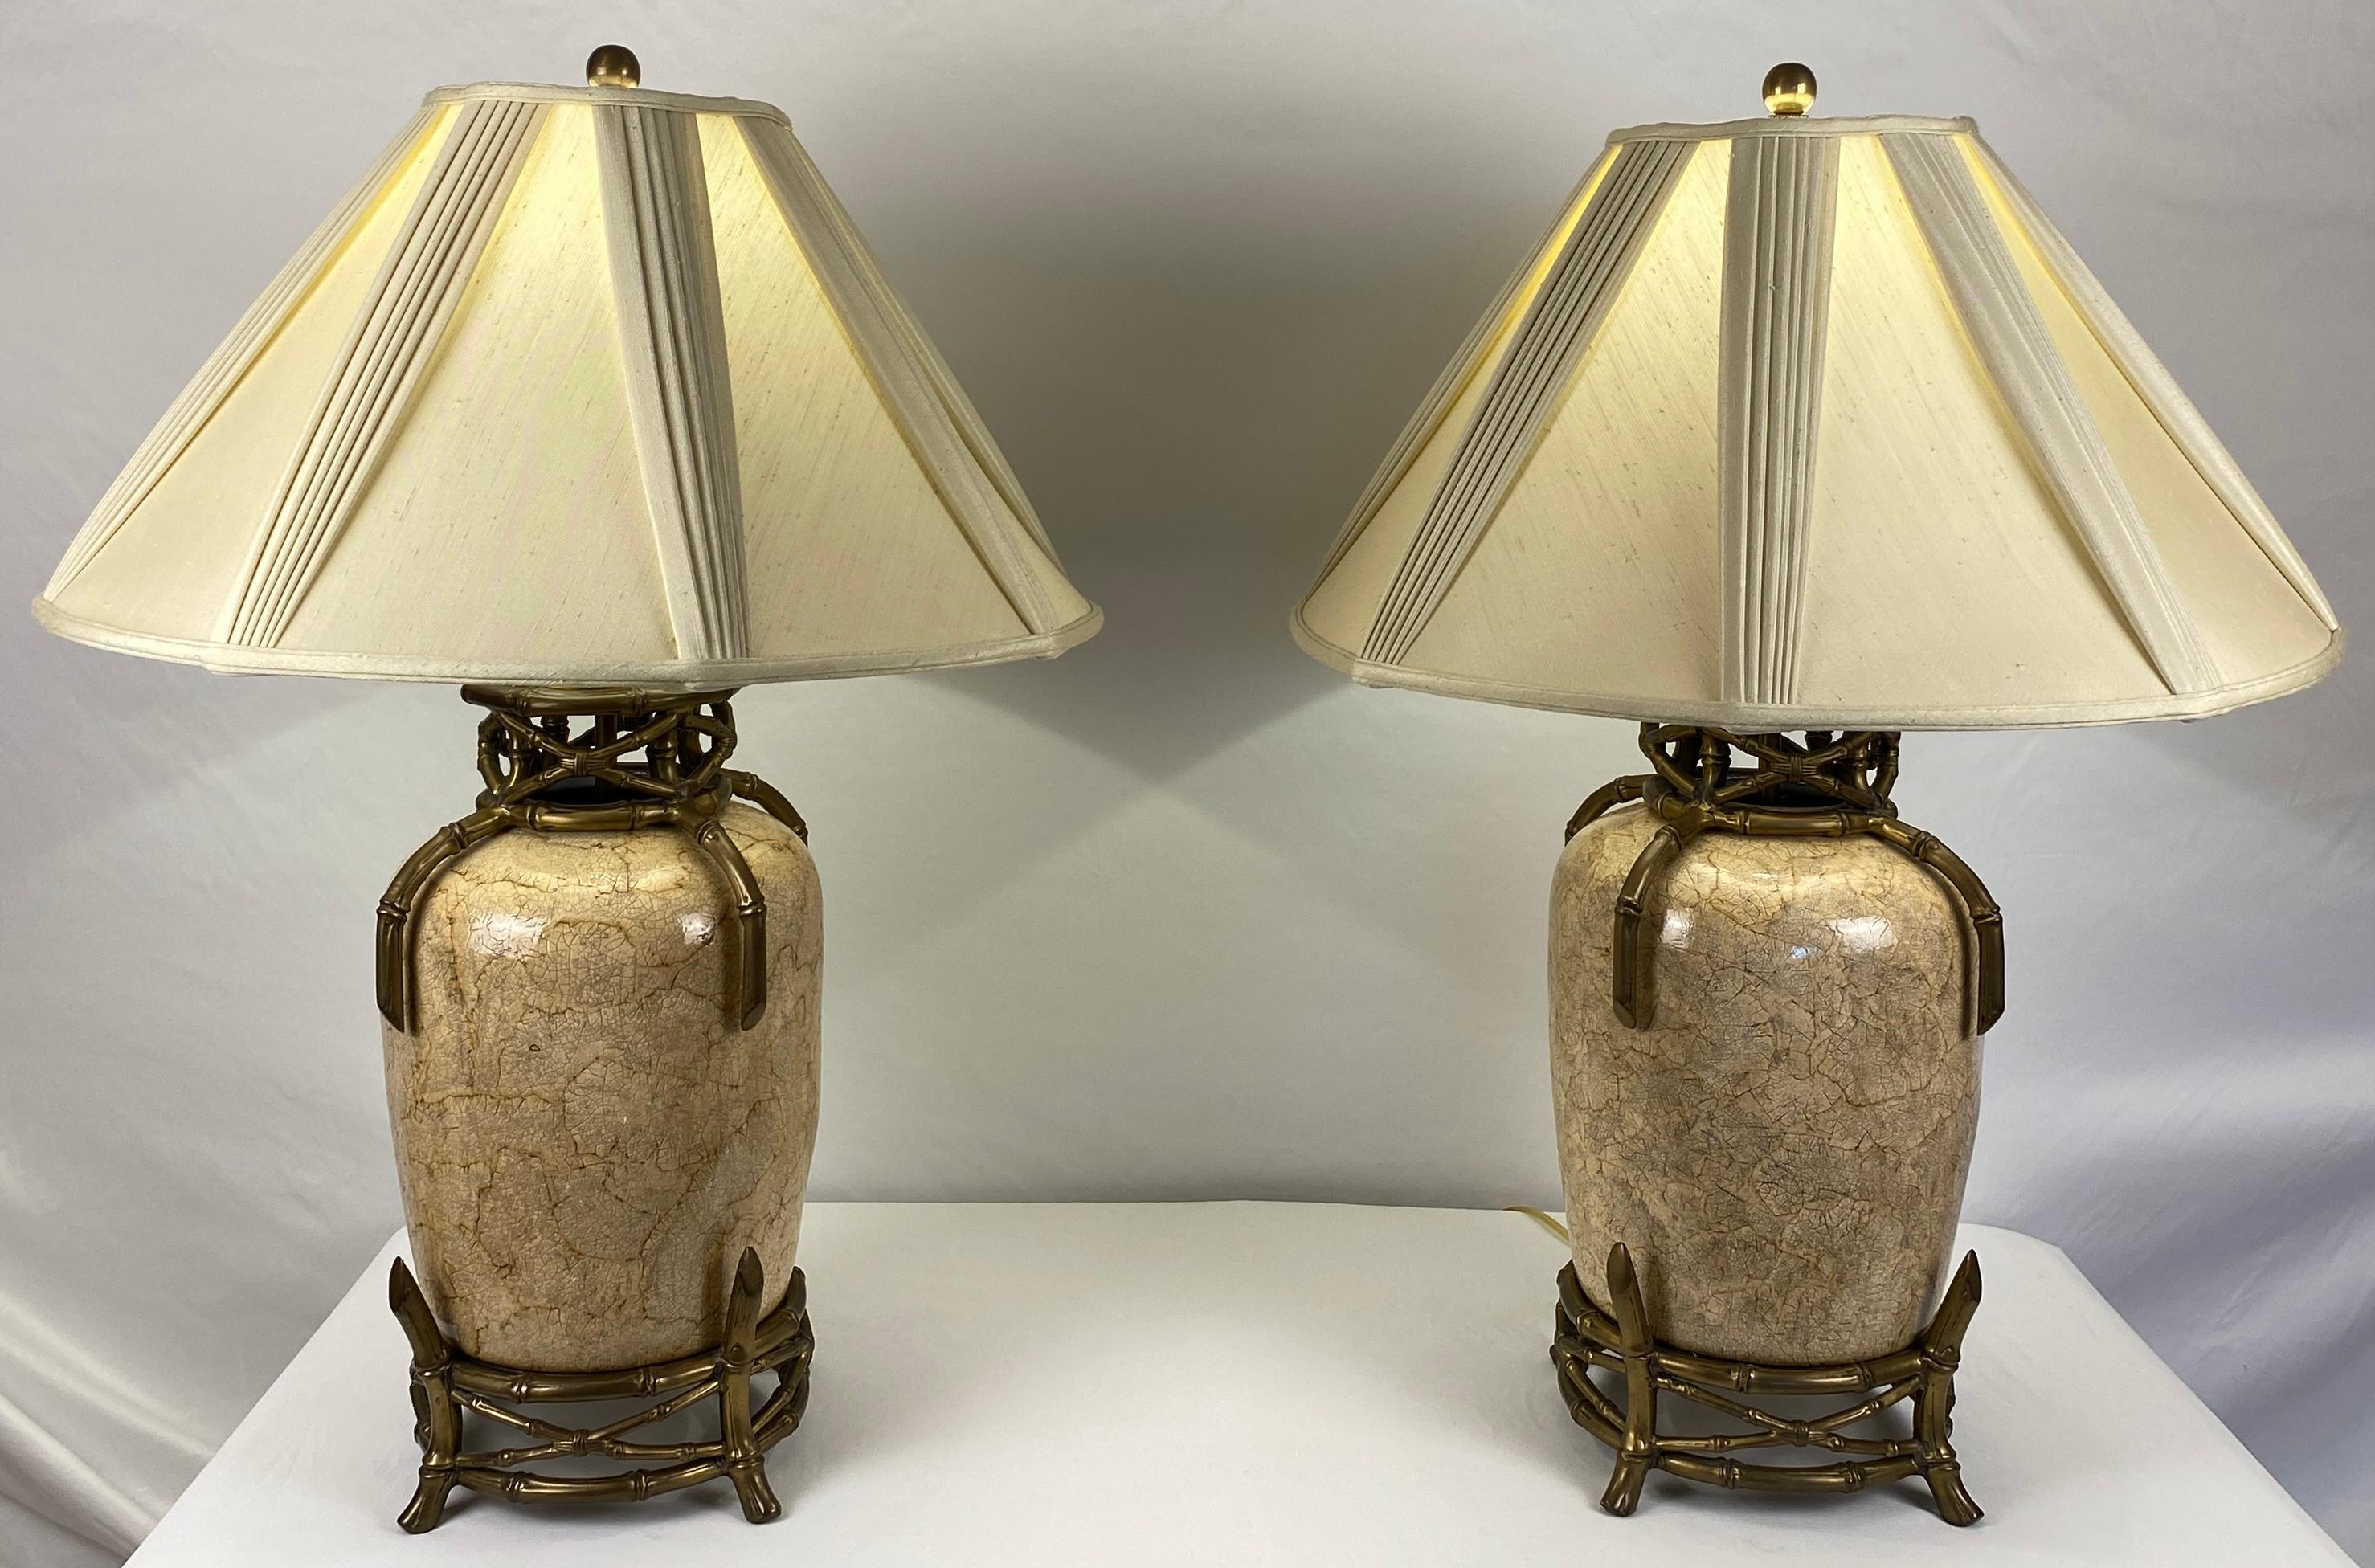 A very stylish pair of table lamps composed of ceramic and brass with faux bamboo accents including large custom made beige silk blend lamp shades. This handsome pair of beige table lamps are very versatile due to their neutral earth tones. Fine